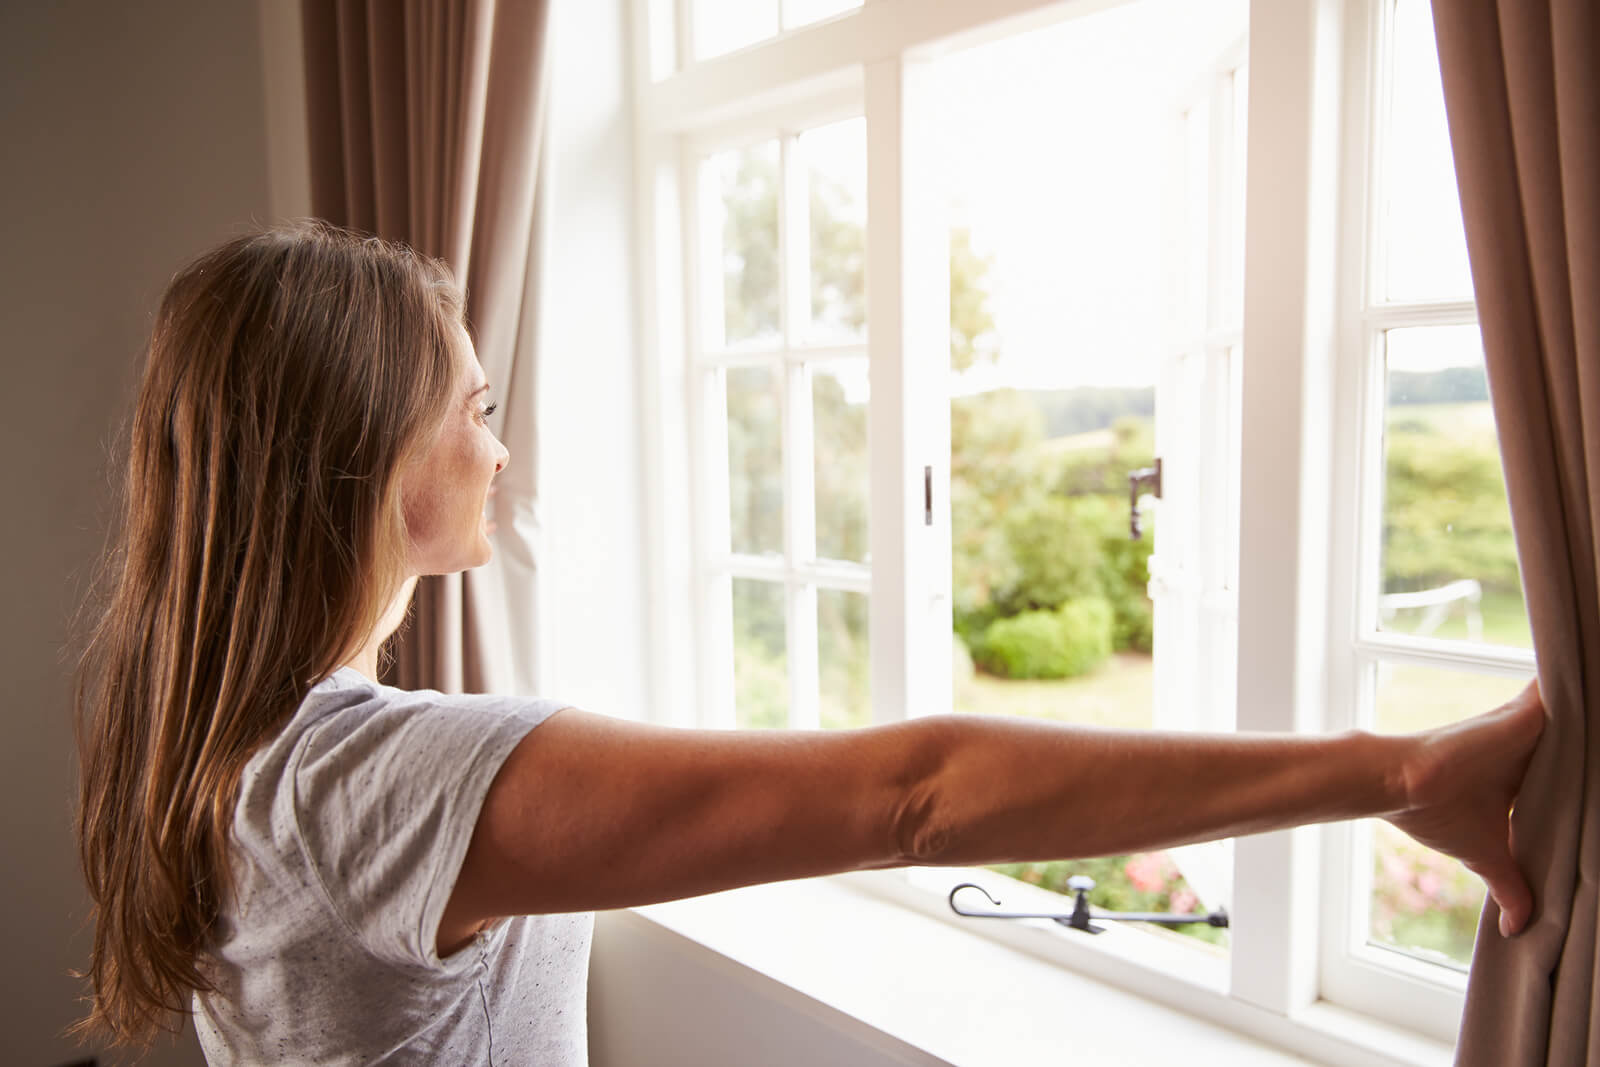 8 Crucial Factors that Drive Window Replacement Costs